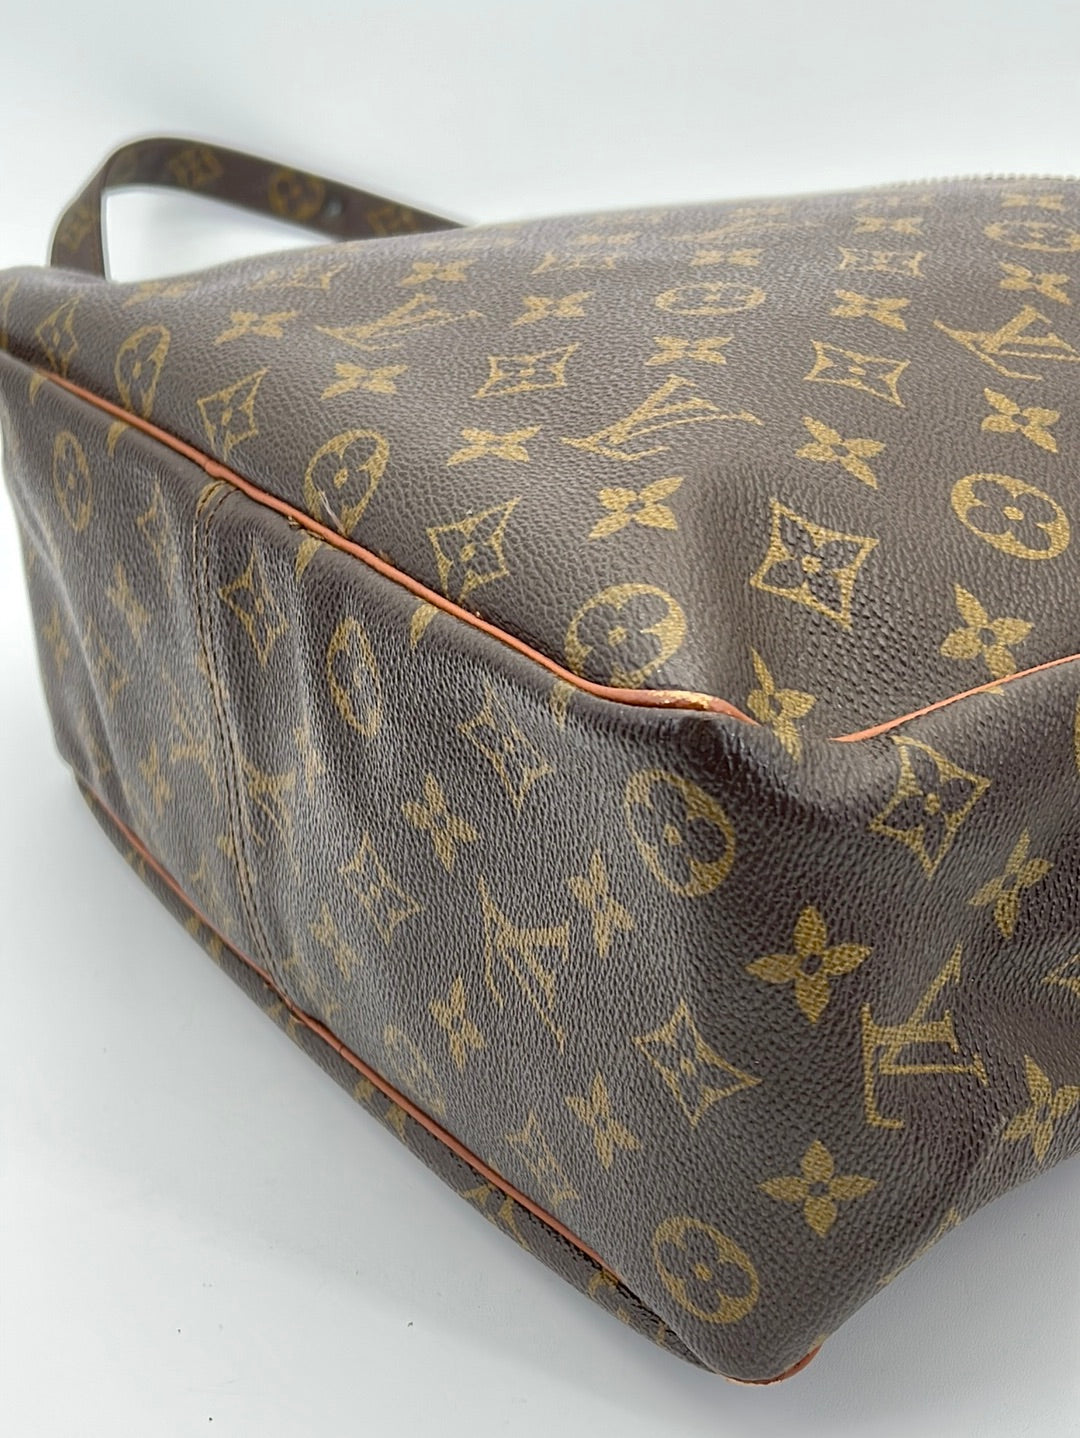 Buy Free Shipping Authentic Pre-owned Louis Vuitton Vintage Monogram Marceau  GM Shoulder Bag M40264 No.70 210608 from Japan - Buy authentic Plus  exclusive items from Japan